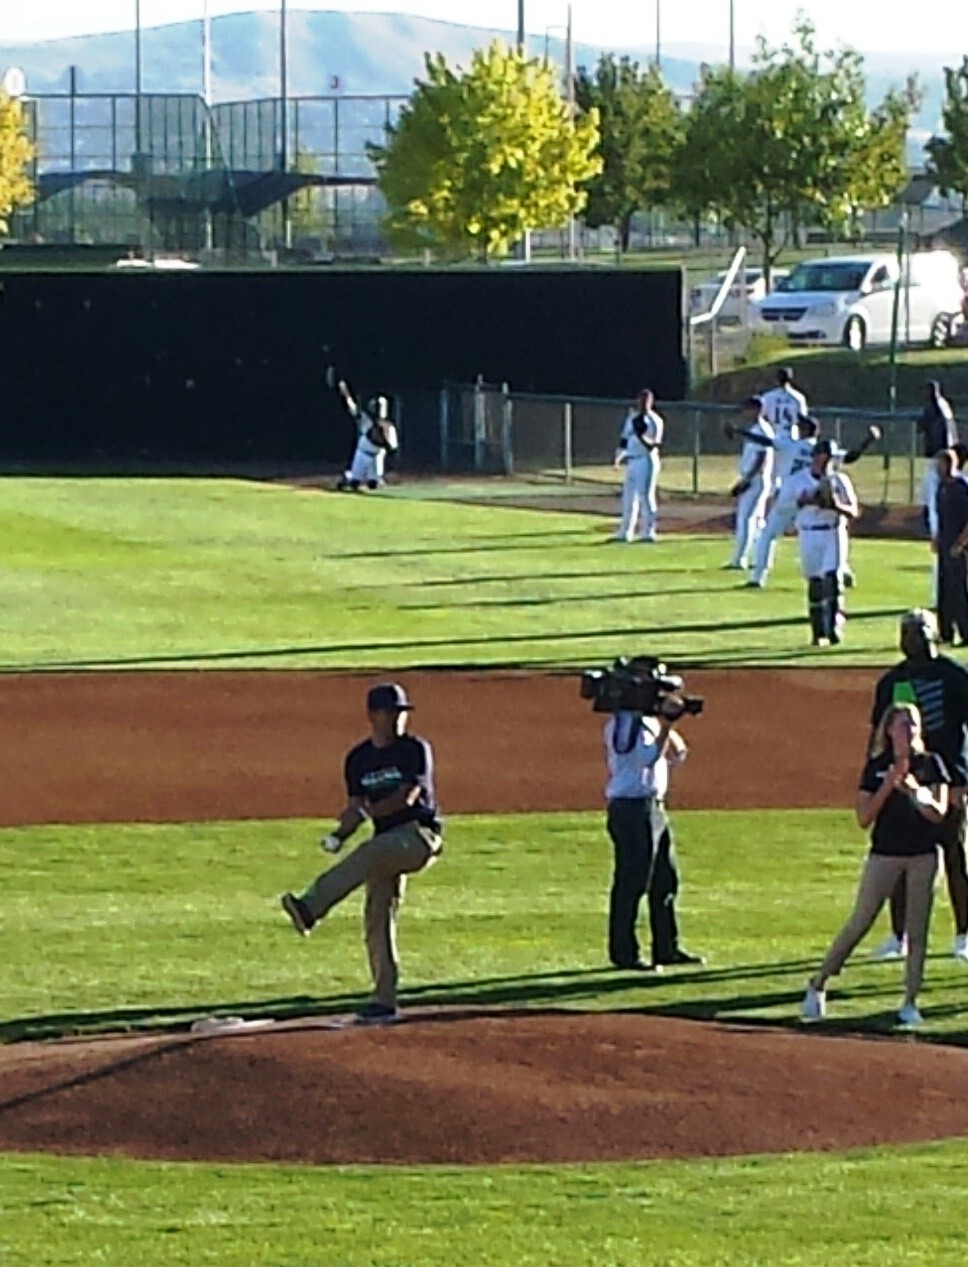 VTC Vice President Throwing the first pitch at a Tri-City Dust Devils game.